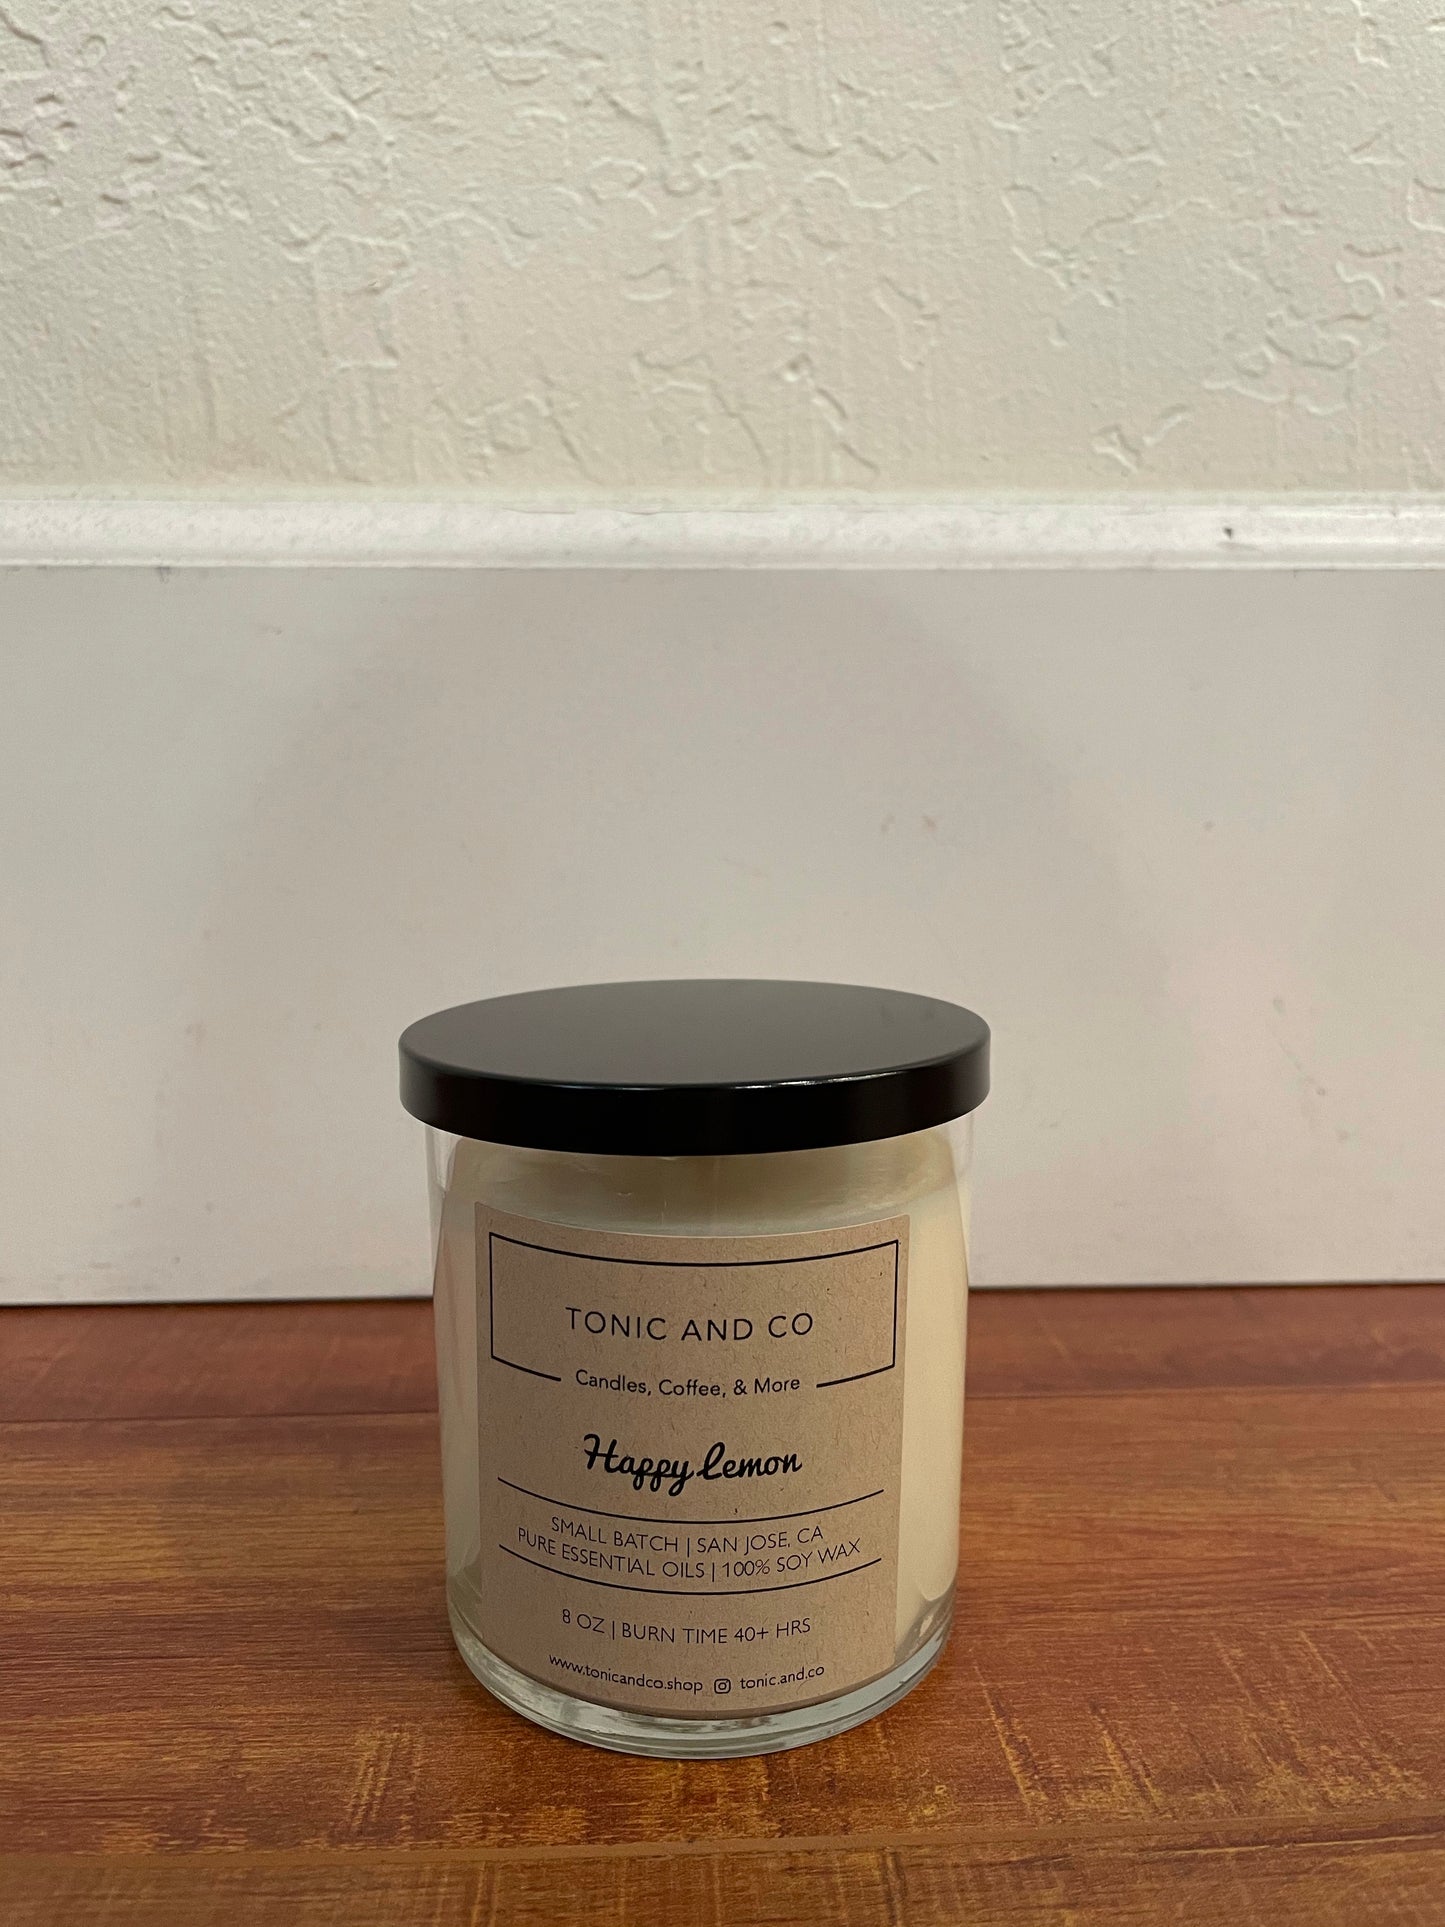 Tonic and Co, Happy Lemon Soy Scented Candle